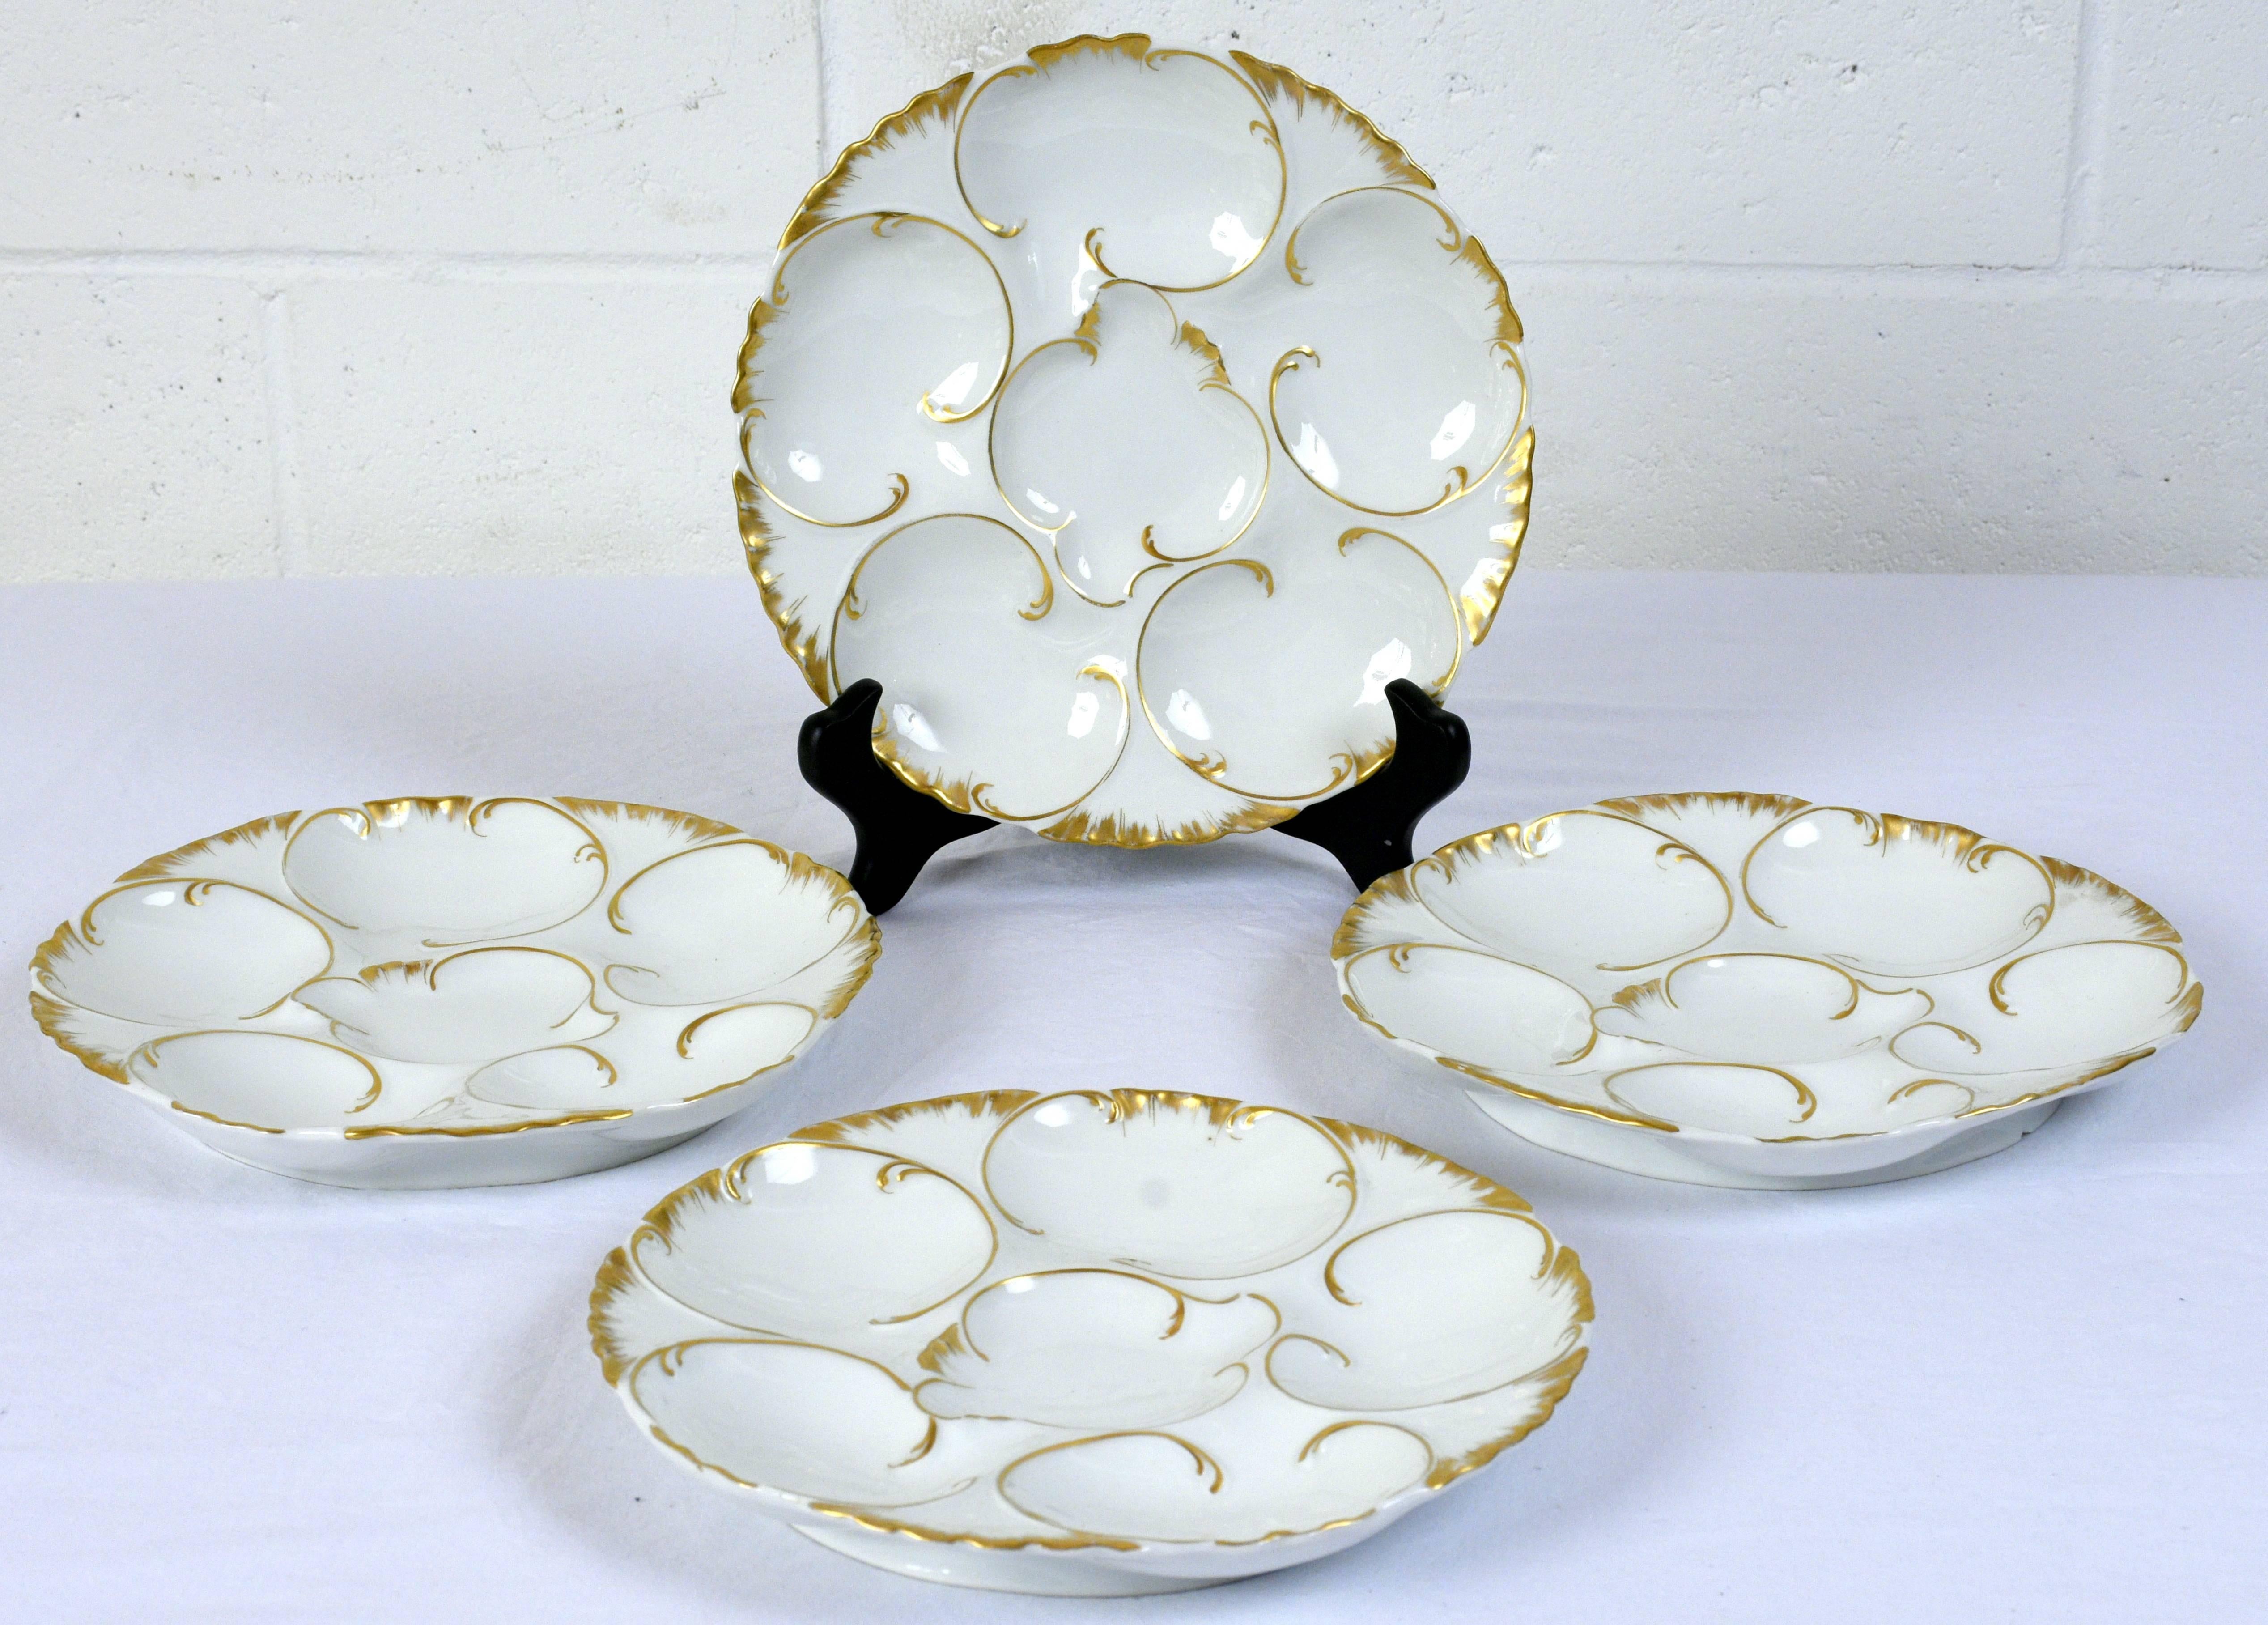 This set of eight 1970s oyster plates are made of porcelain with gilt trims. The round plates have a scallop design edge and feature six places for oysters in the centre of the plate. The plates are accented by leaf details. The plates are marked